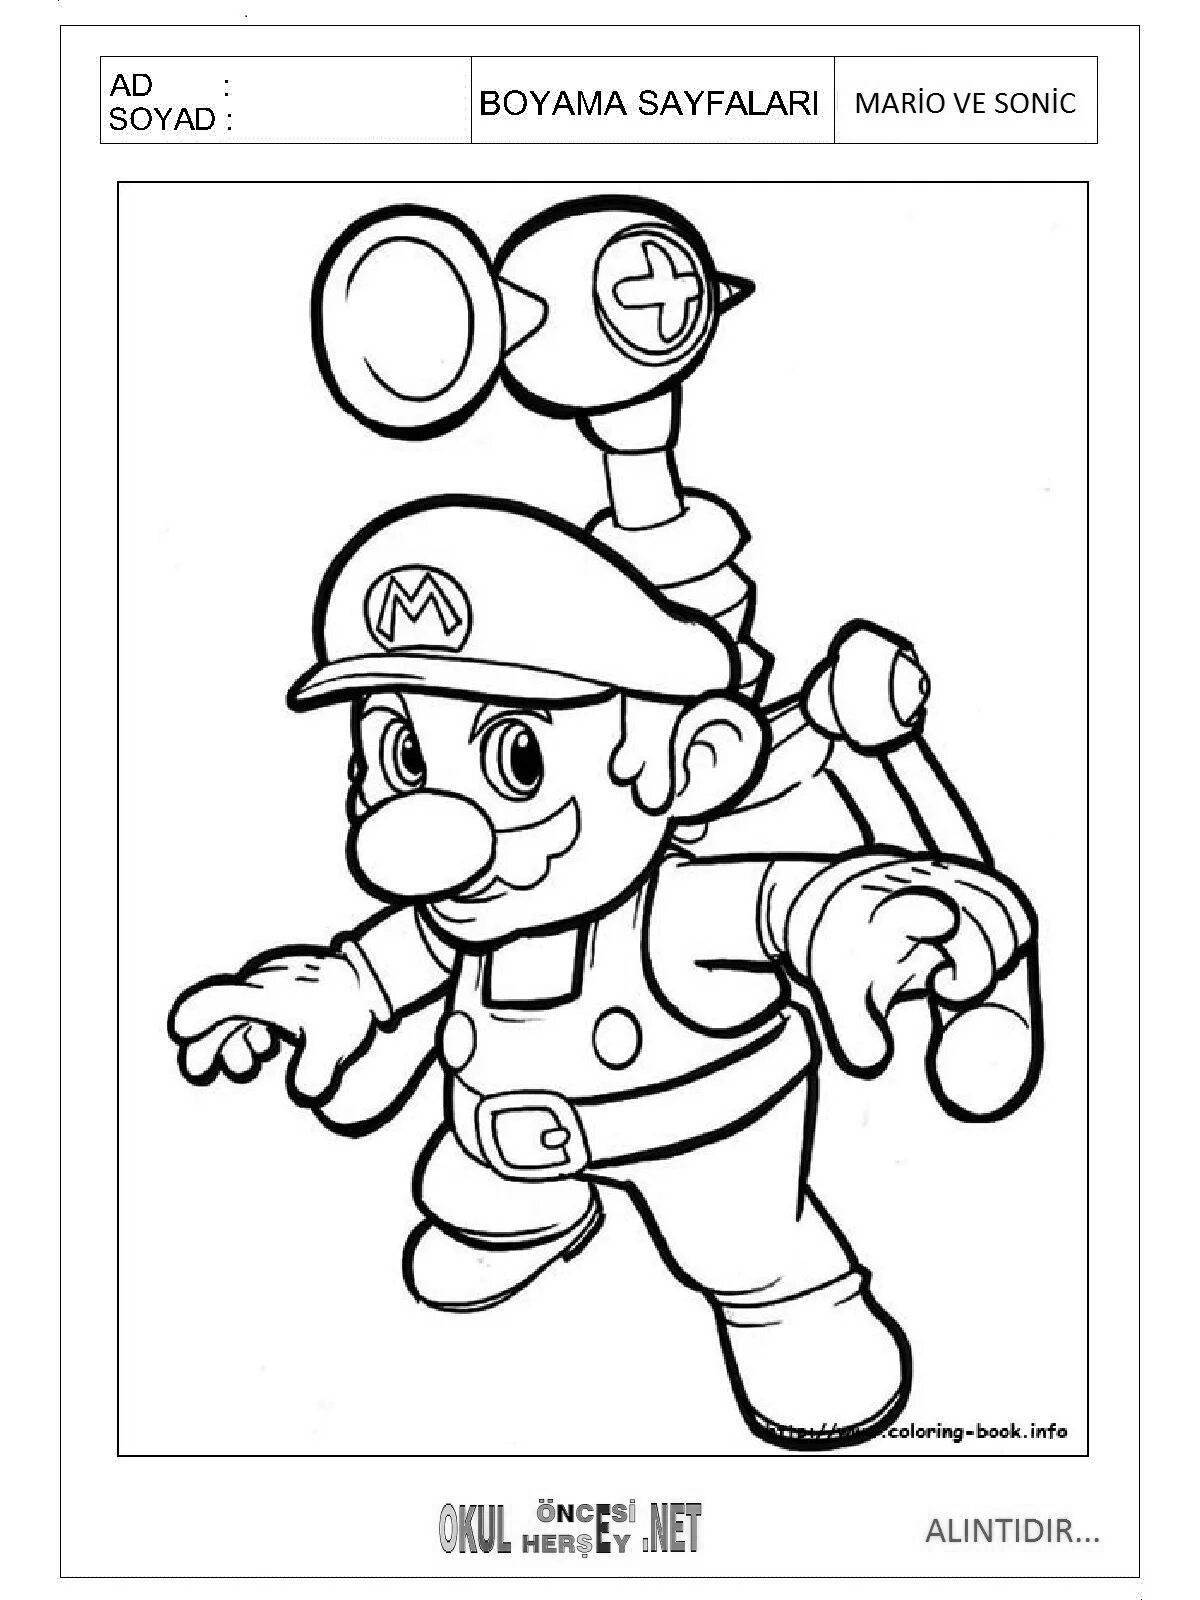 Adorable mario and sonic coloring book